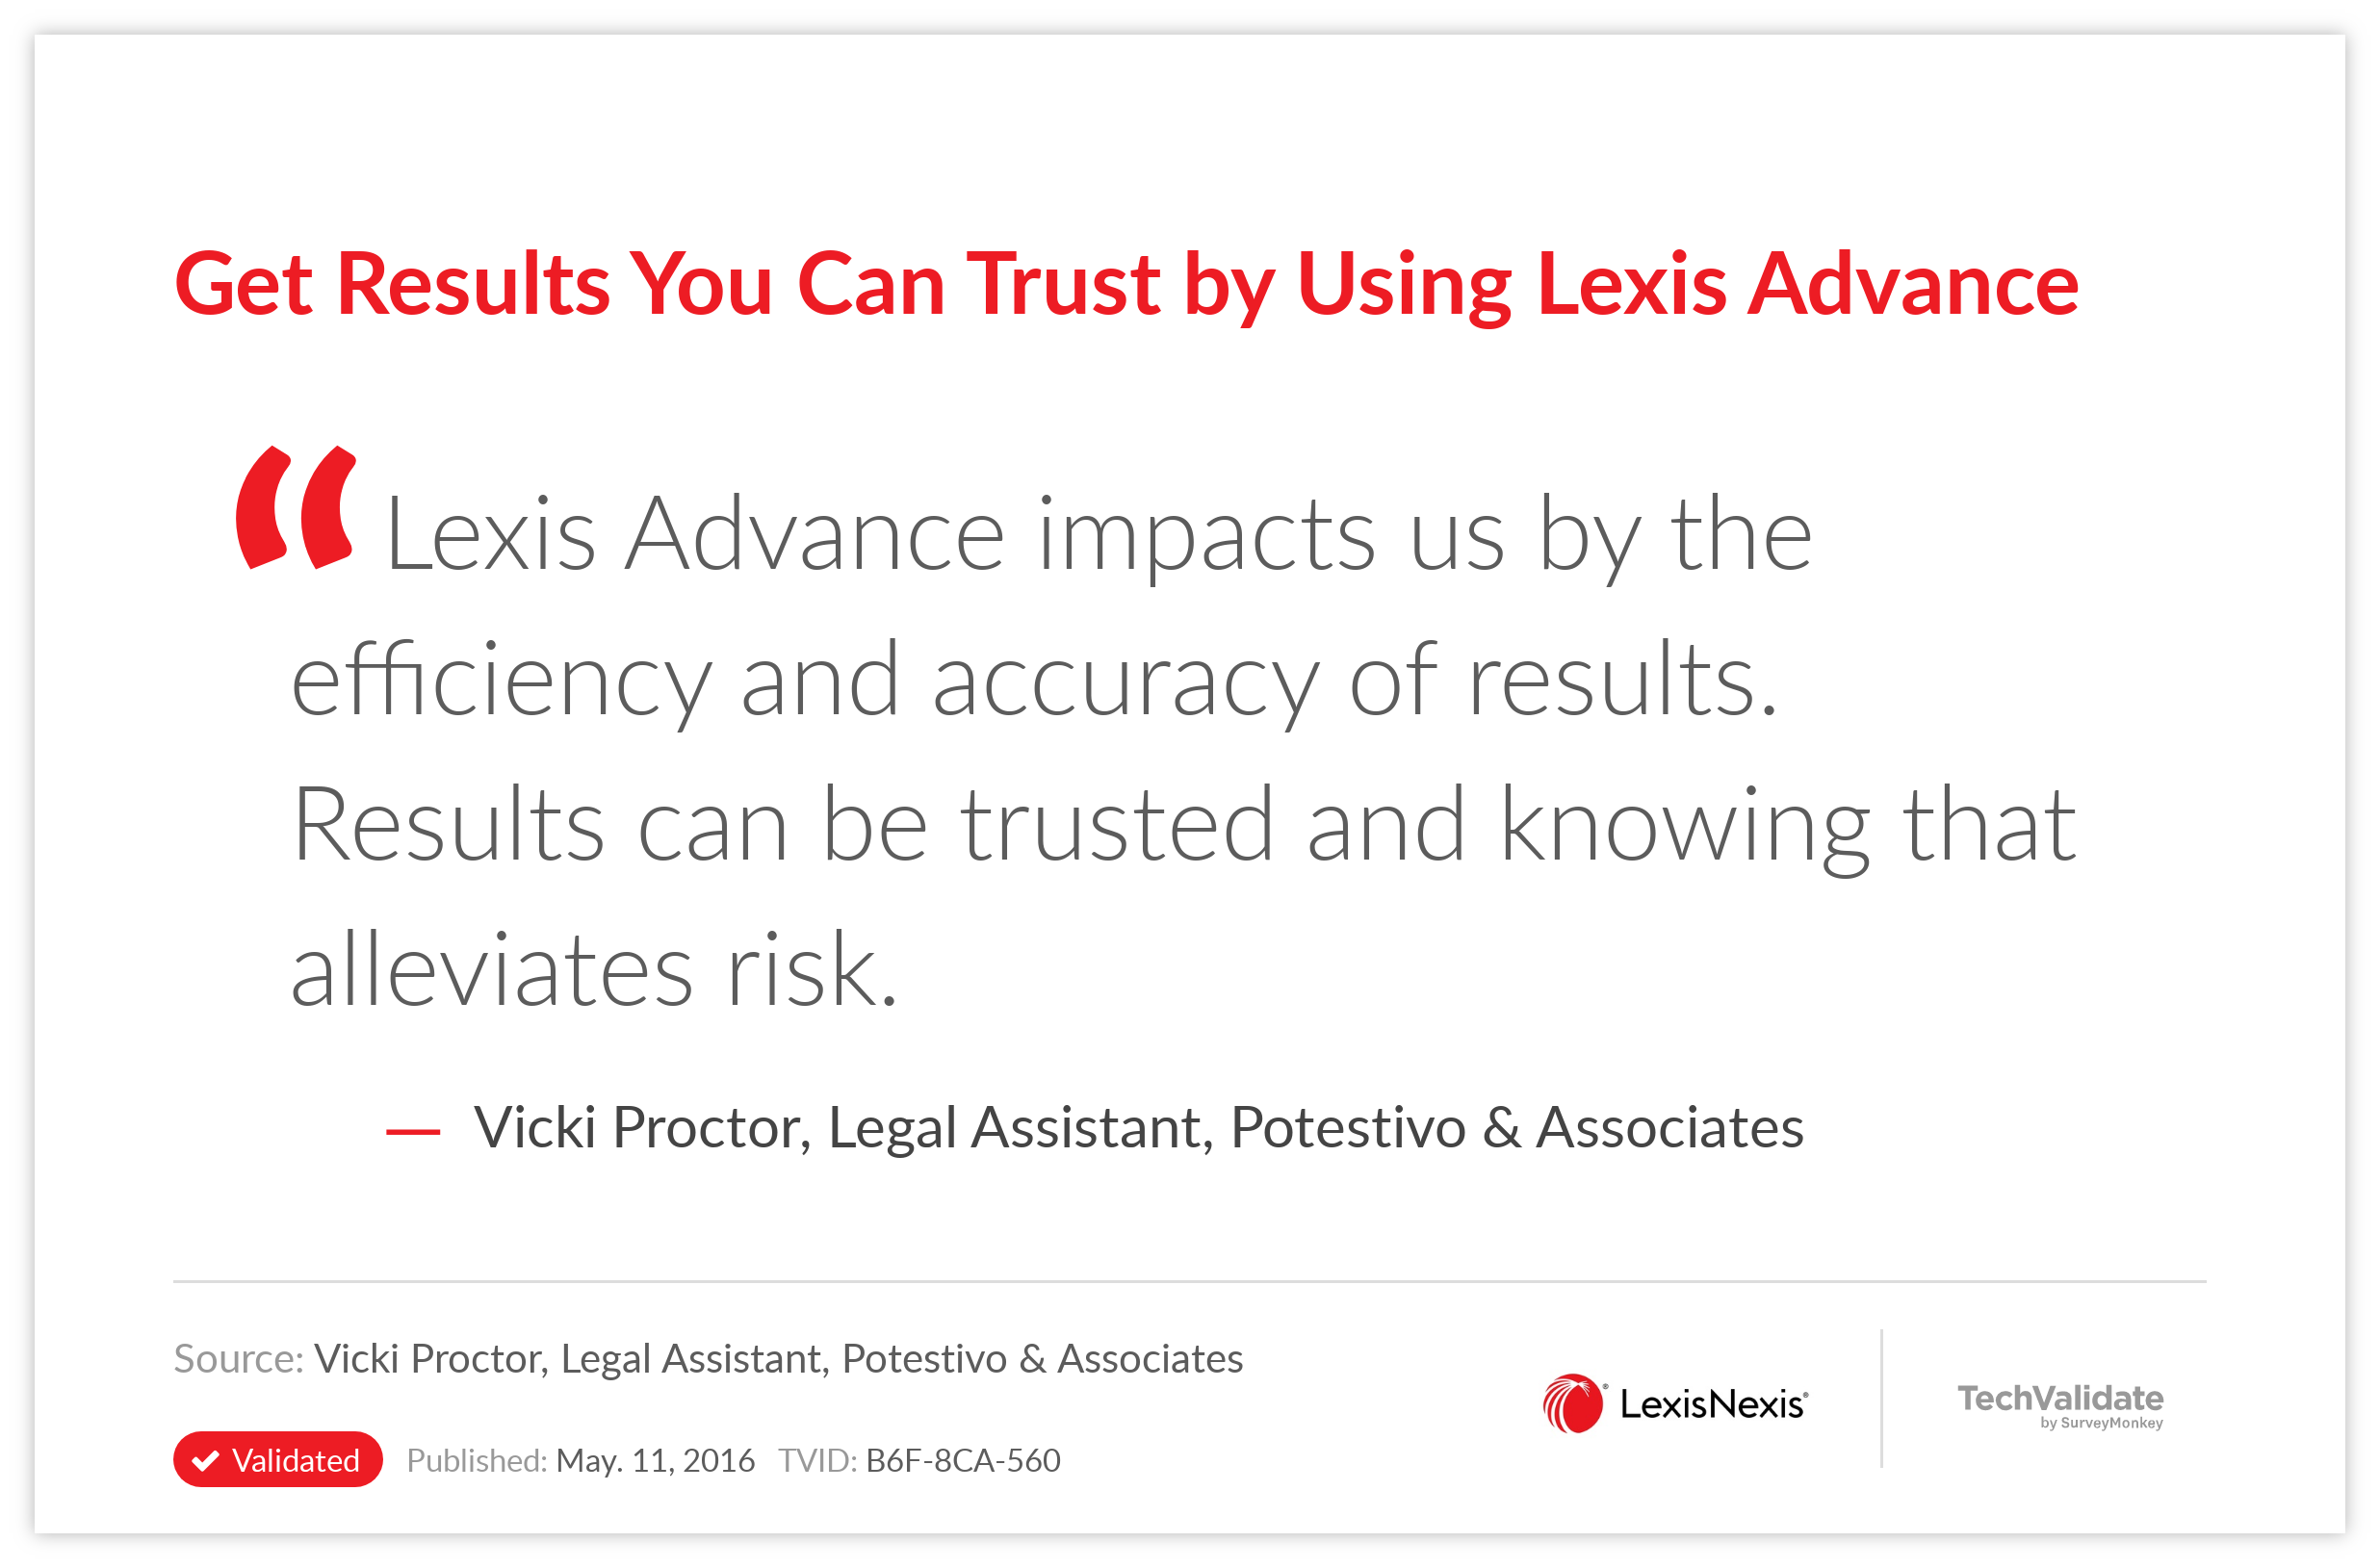 Get Results You Can Trust by Using Lexis Advance